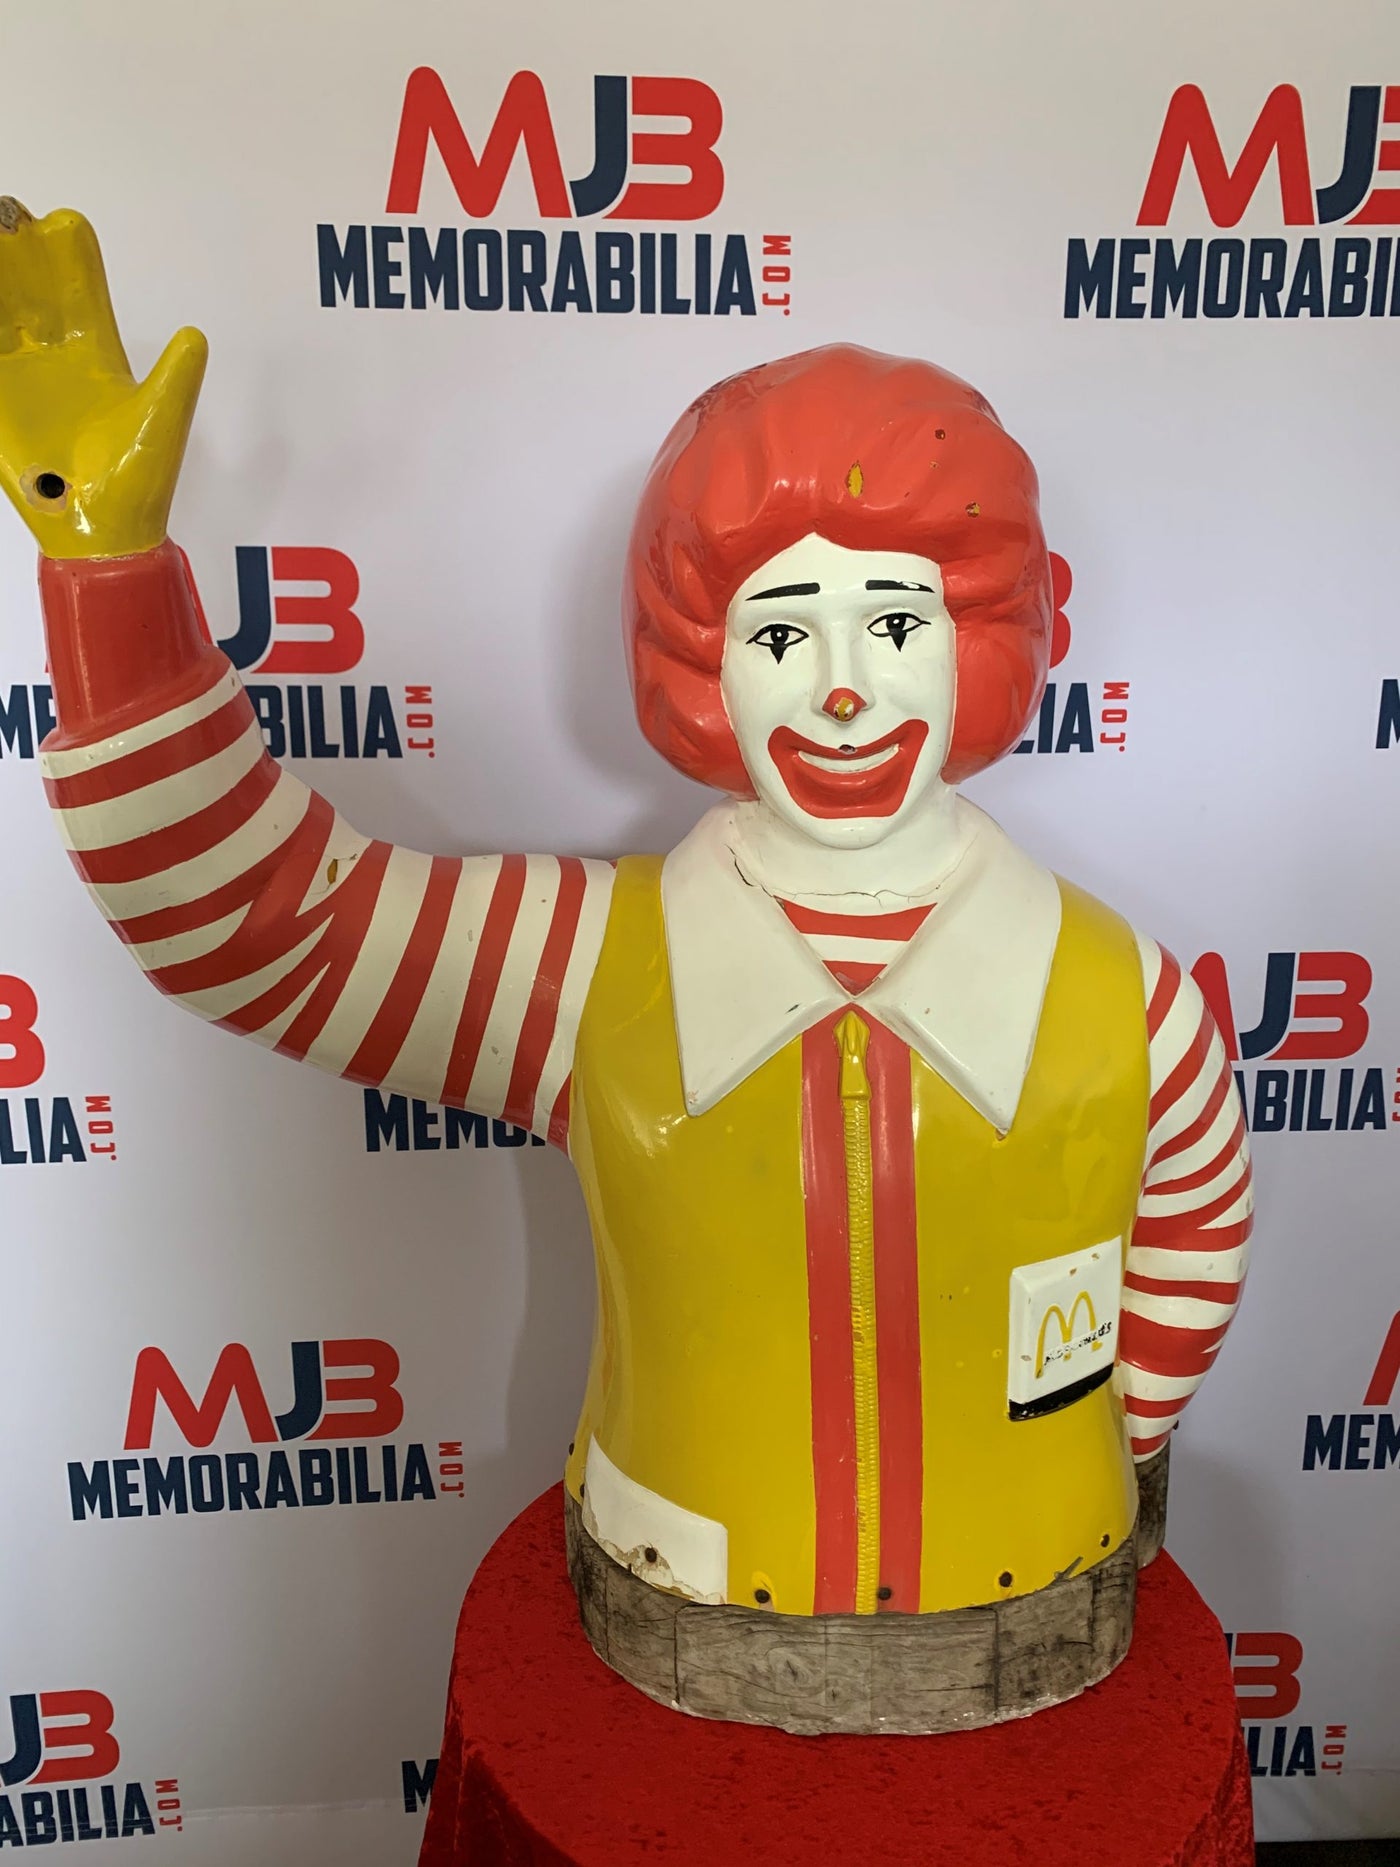 Vintage Ronald McDonald Statue from the 1960s